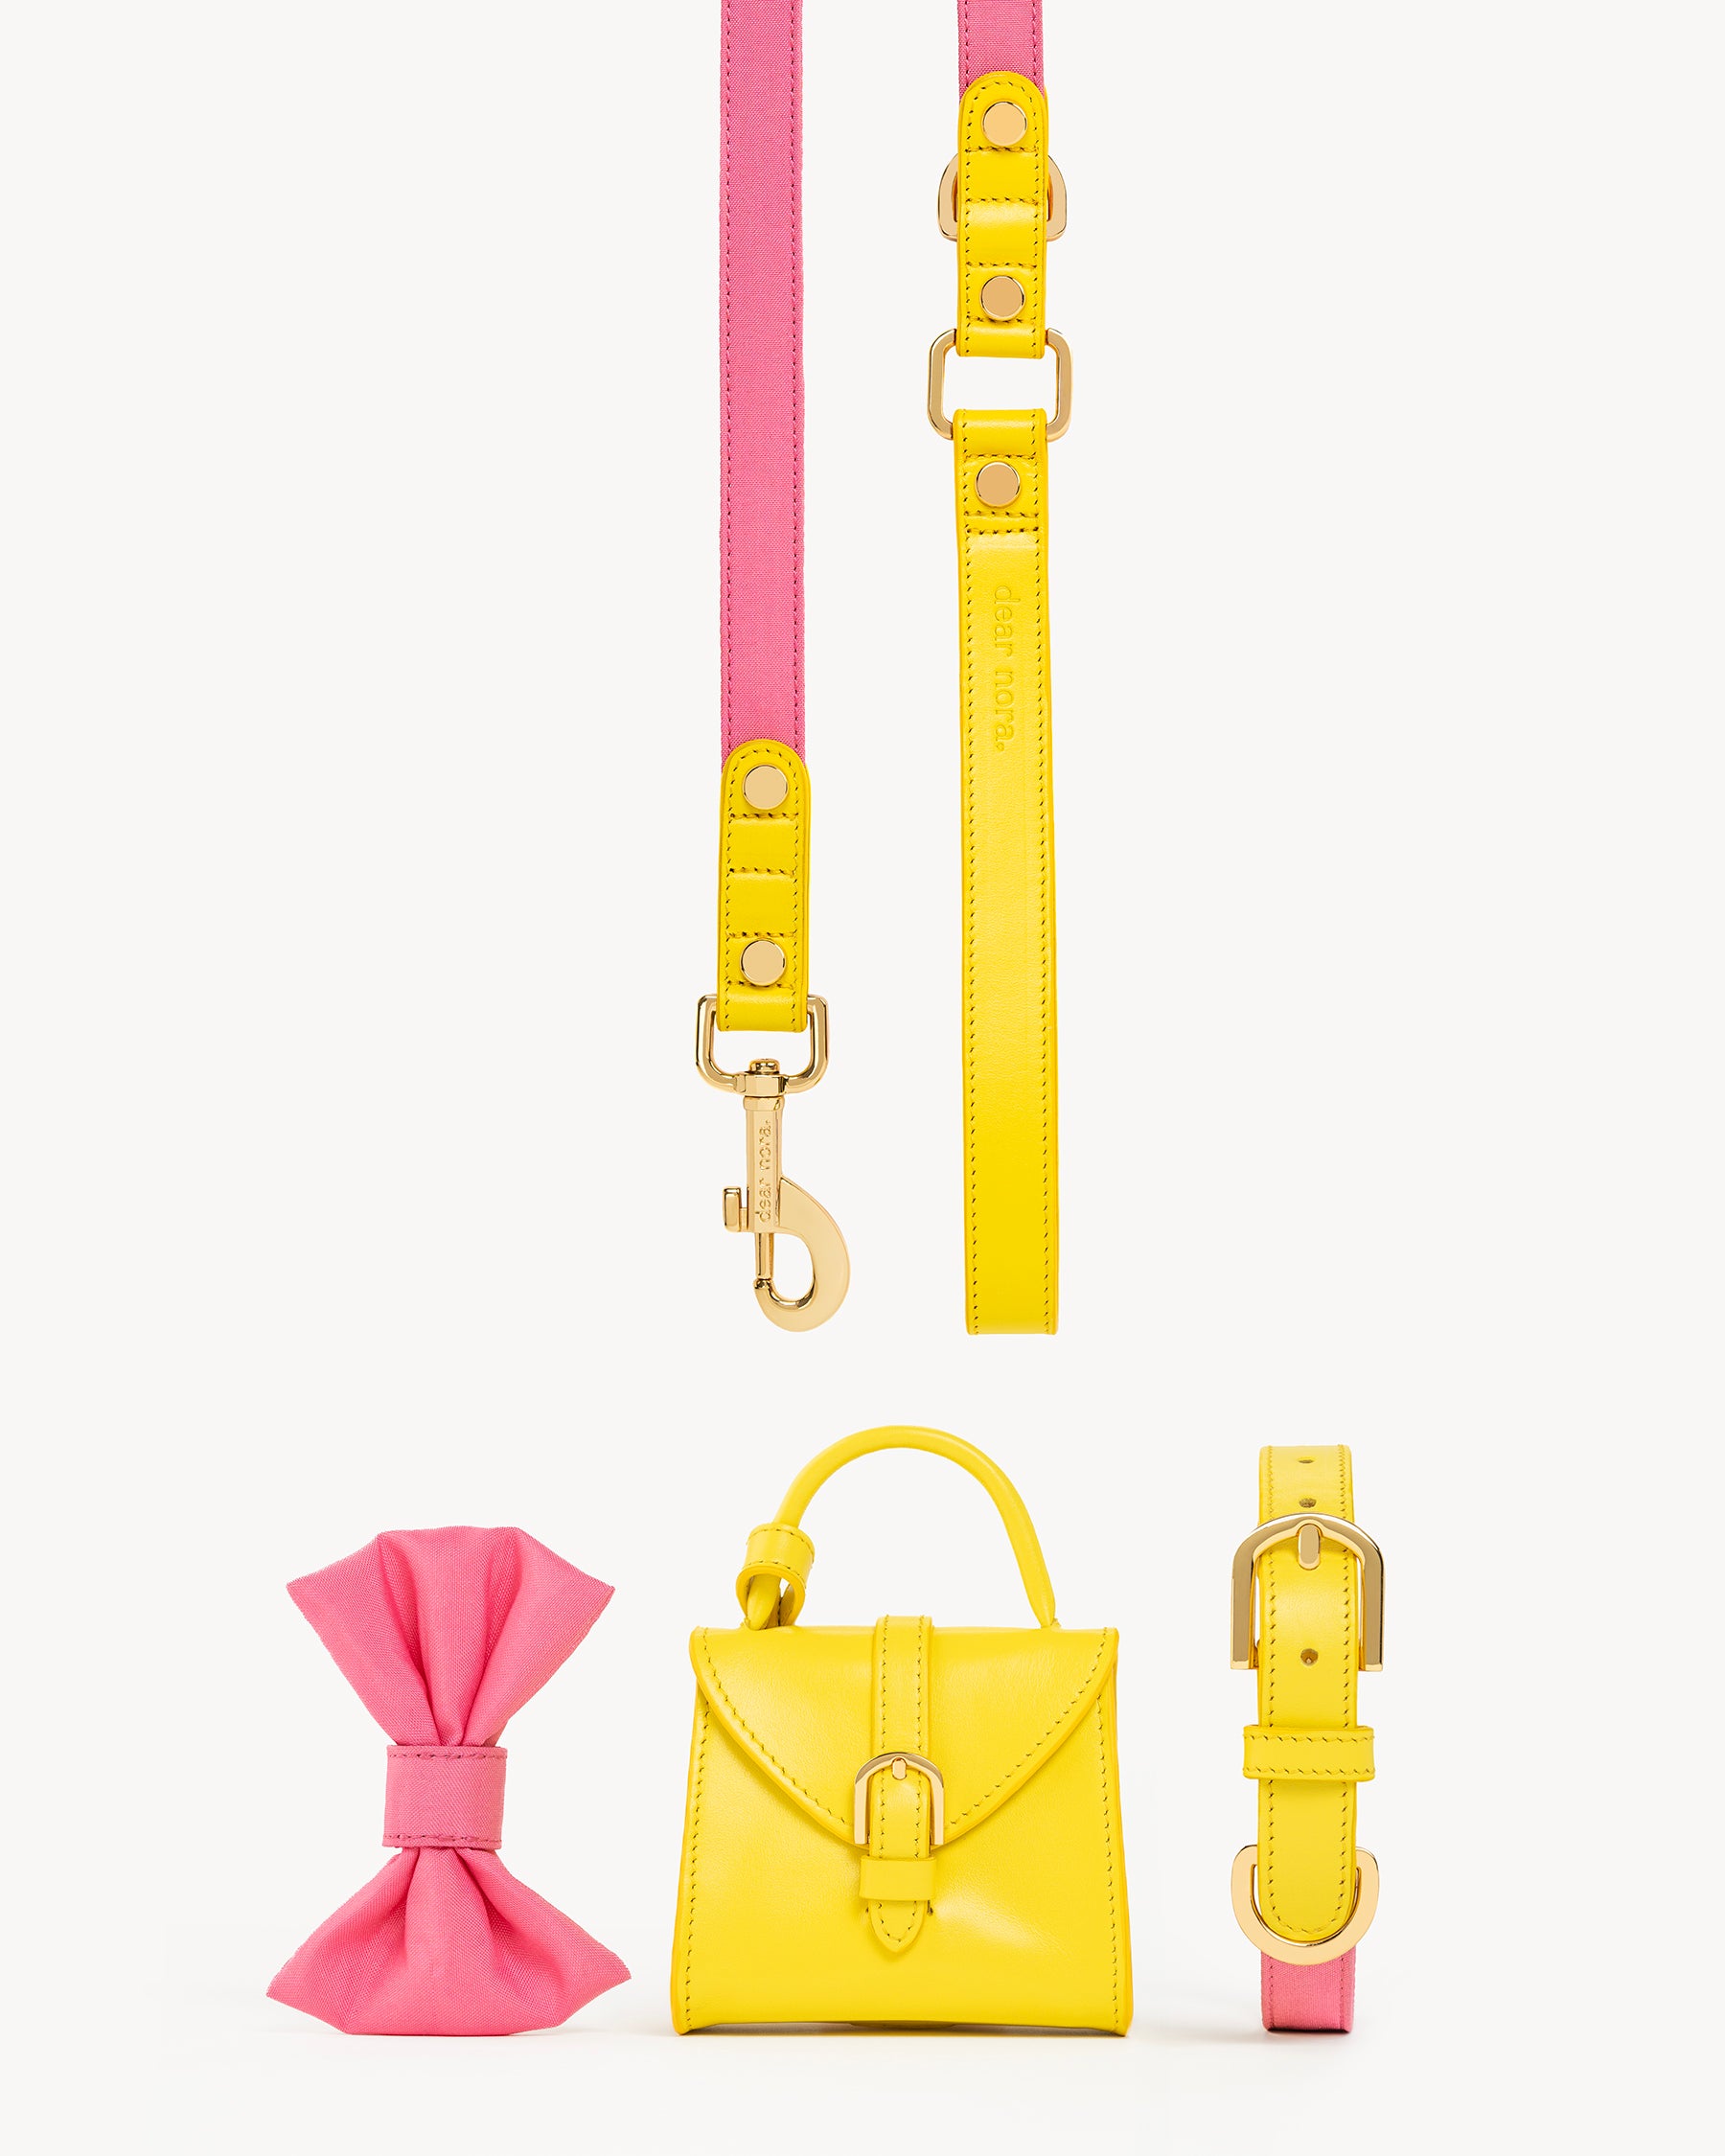 Dear Nora dog accessories set - yellow leather and pink fabric – collar, leash, poop bag holder and bow